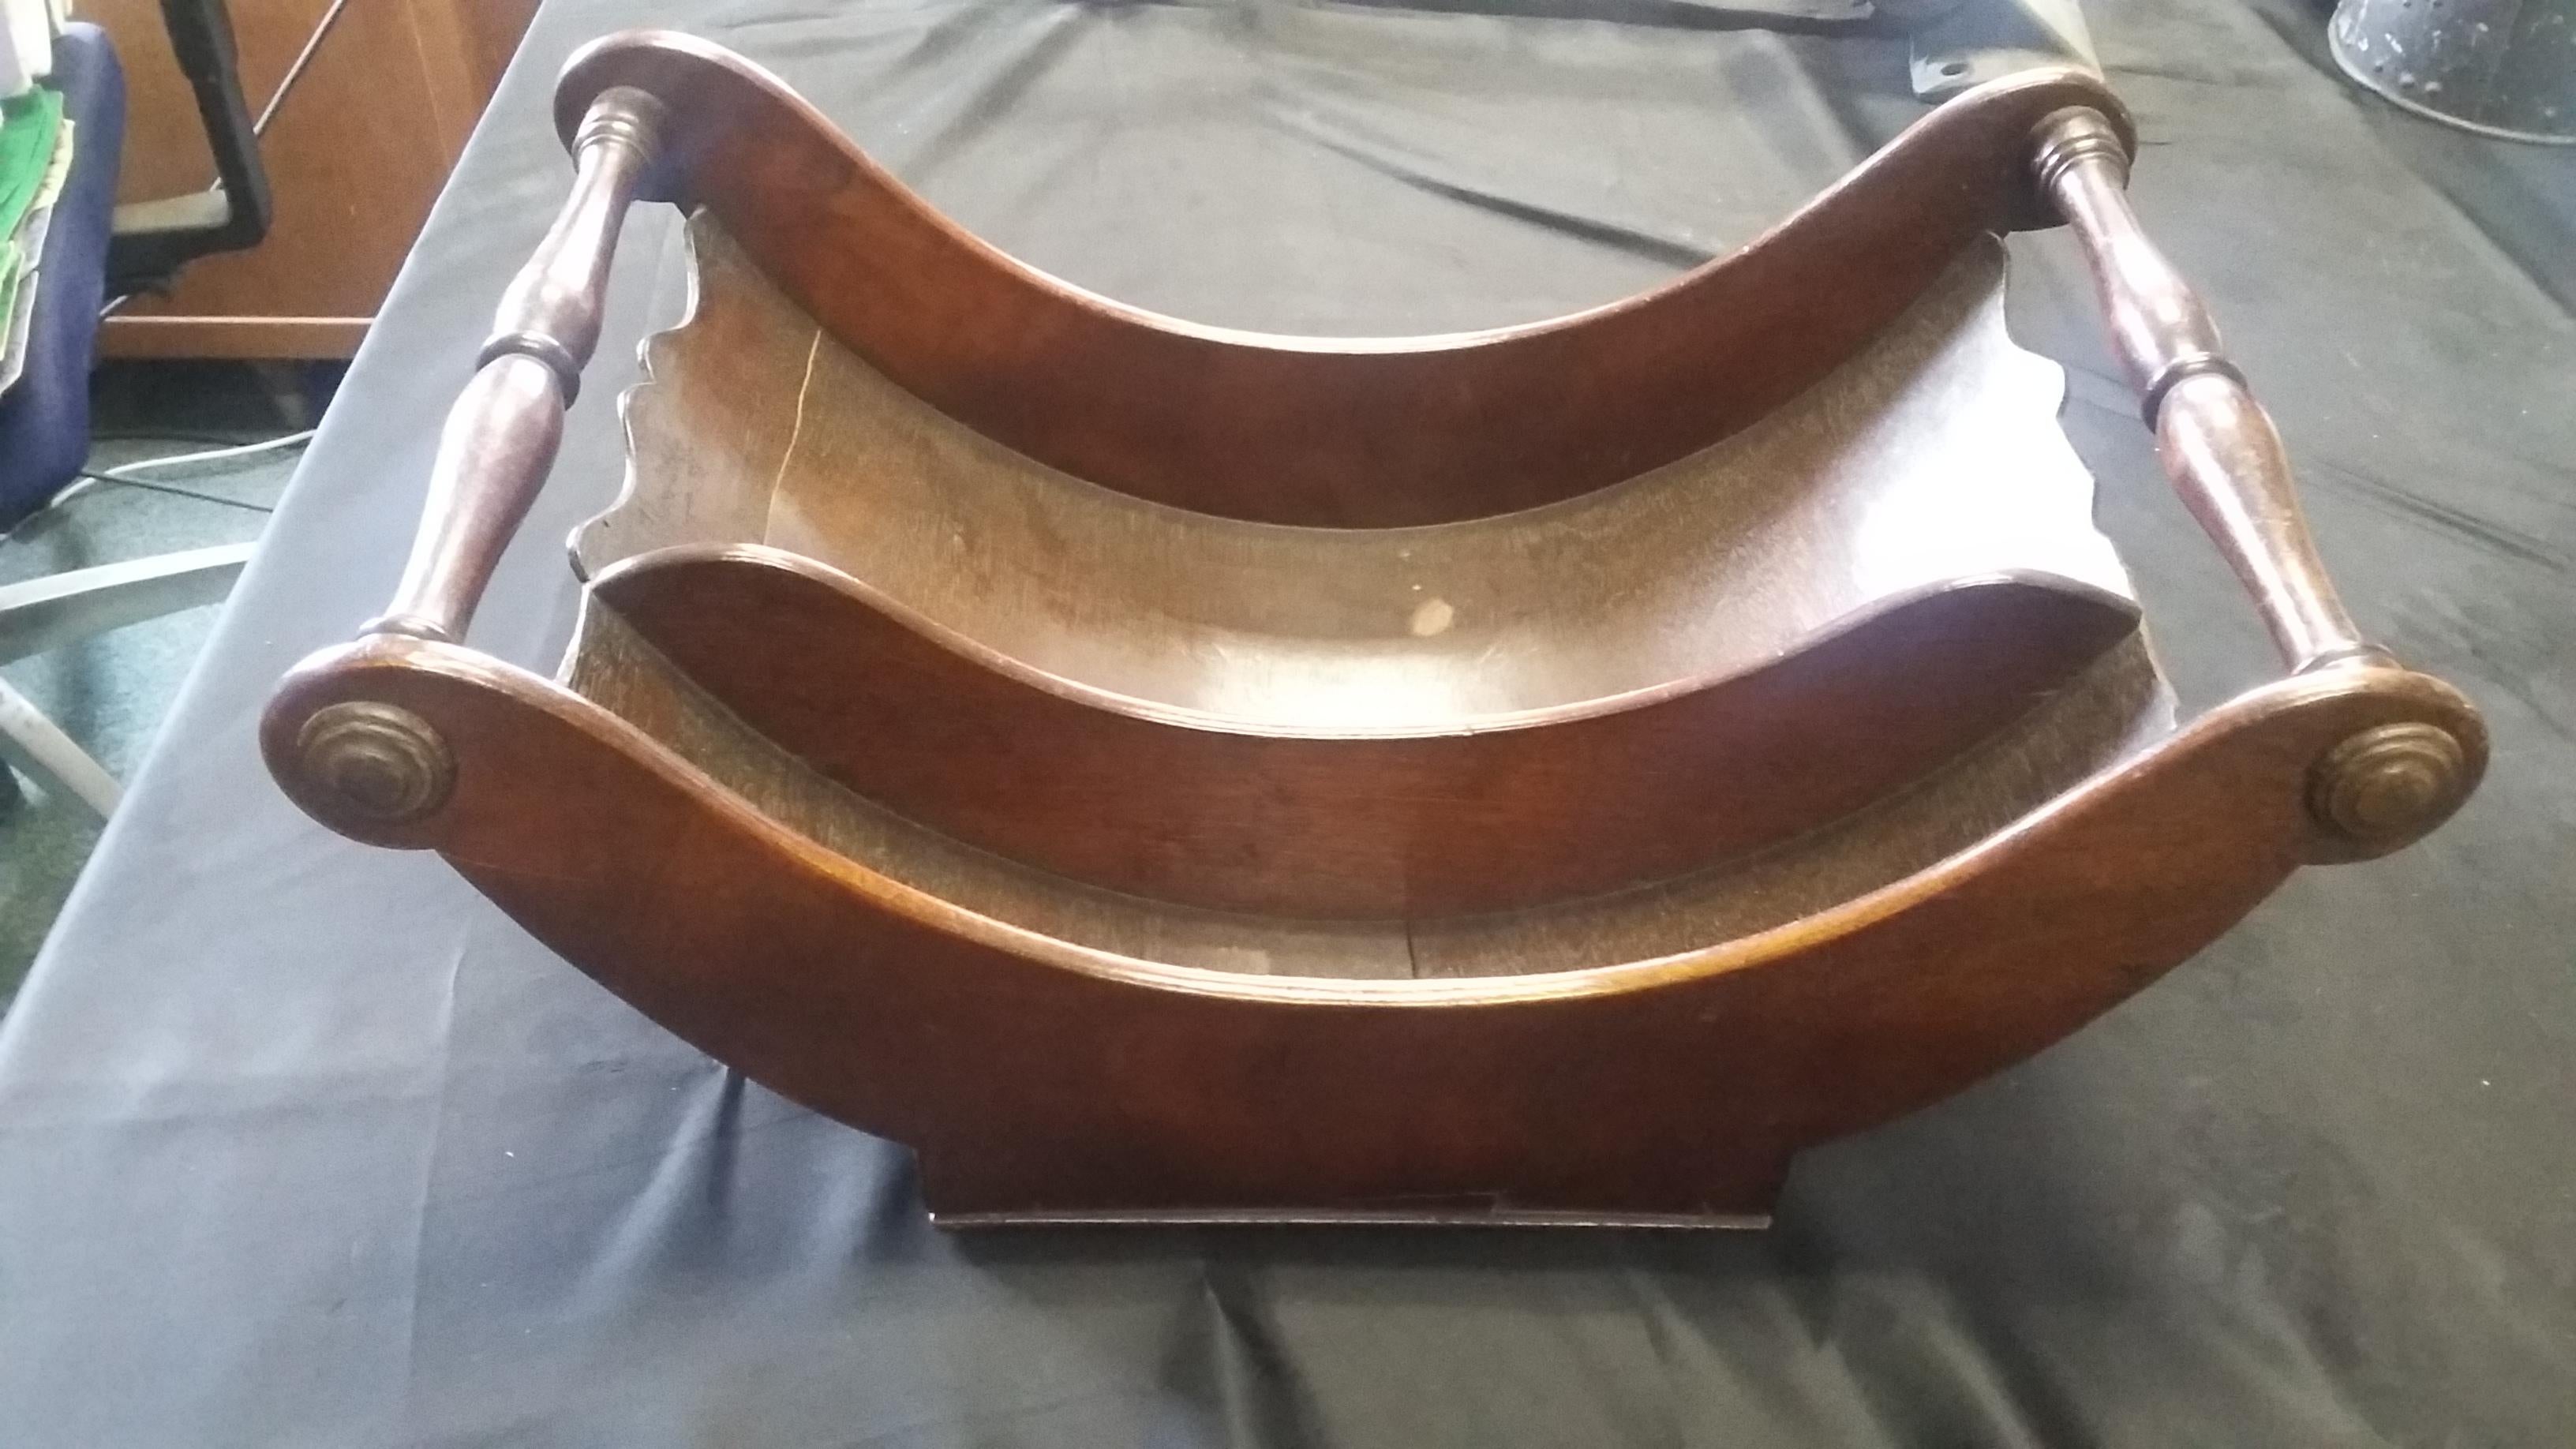 Antique mahogany serving piece. Referred to as a cheese coaster. Made in England perhaps early to mid-18th century. Has 2 visible cracks but is still intact. Designed with 